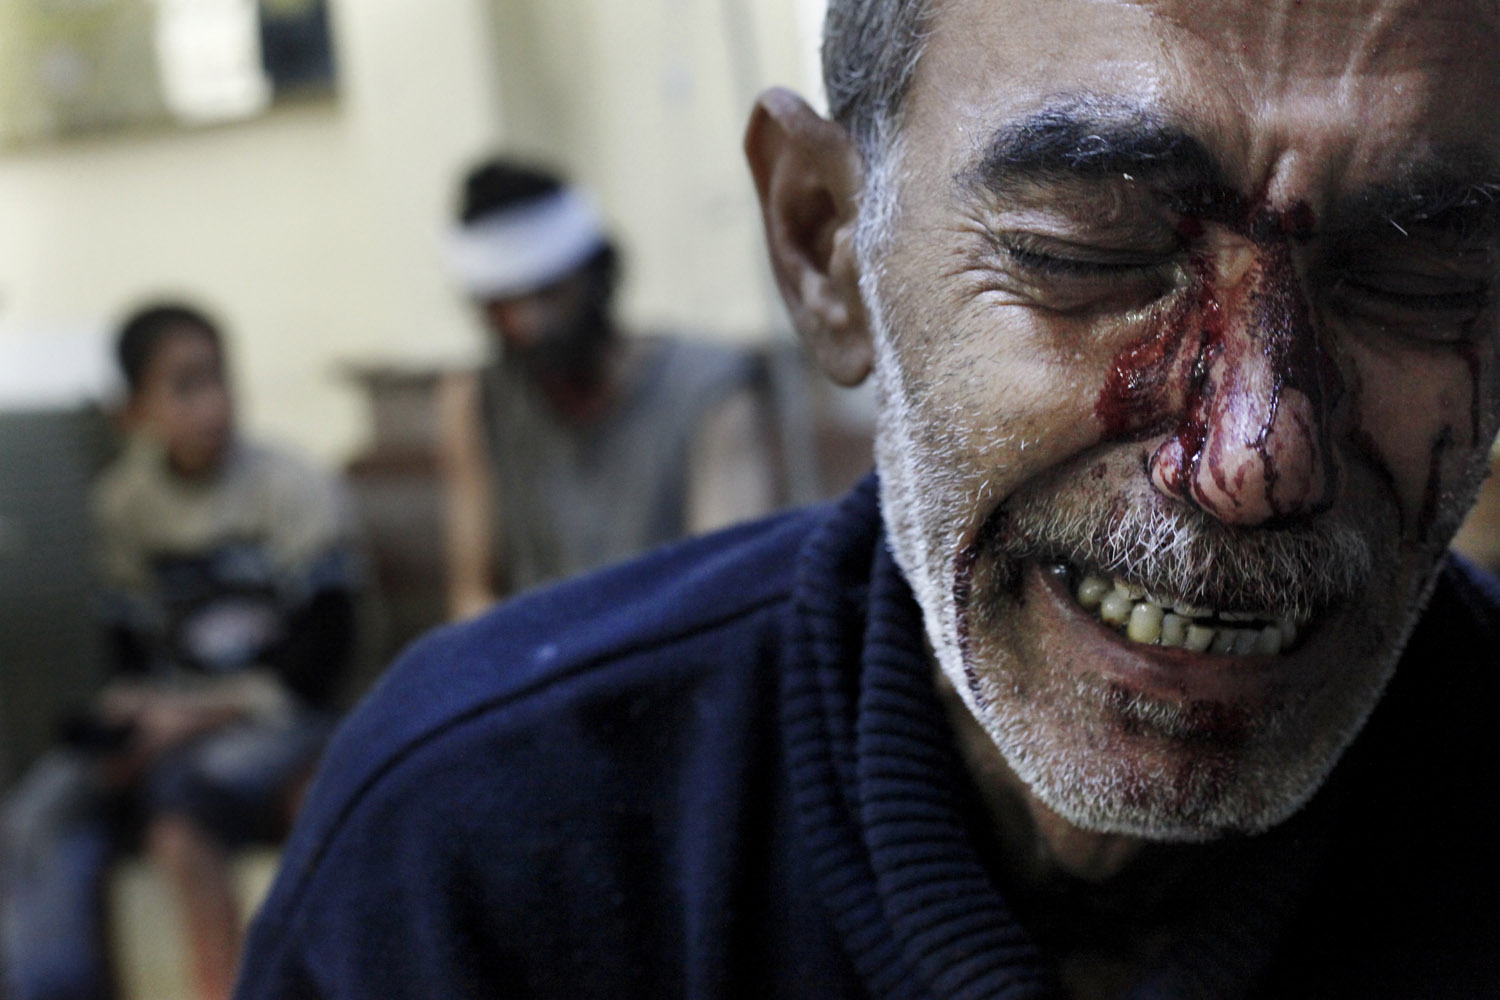 Image: Oct. 31, 2012. Kamal, the father of an 8-year-old girl who was fatally wounded cries while being treated in a local hospital in a rebel-controlled area of Aleppo, Syria.